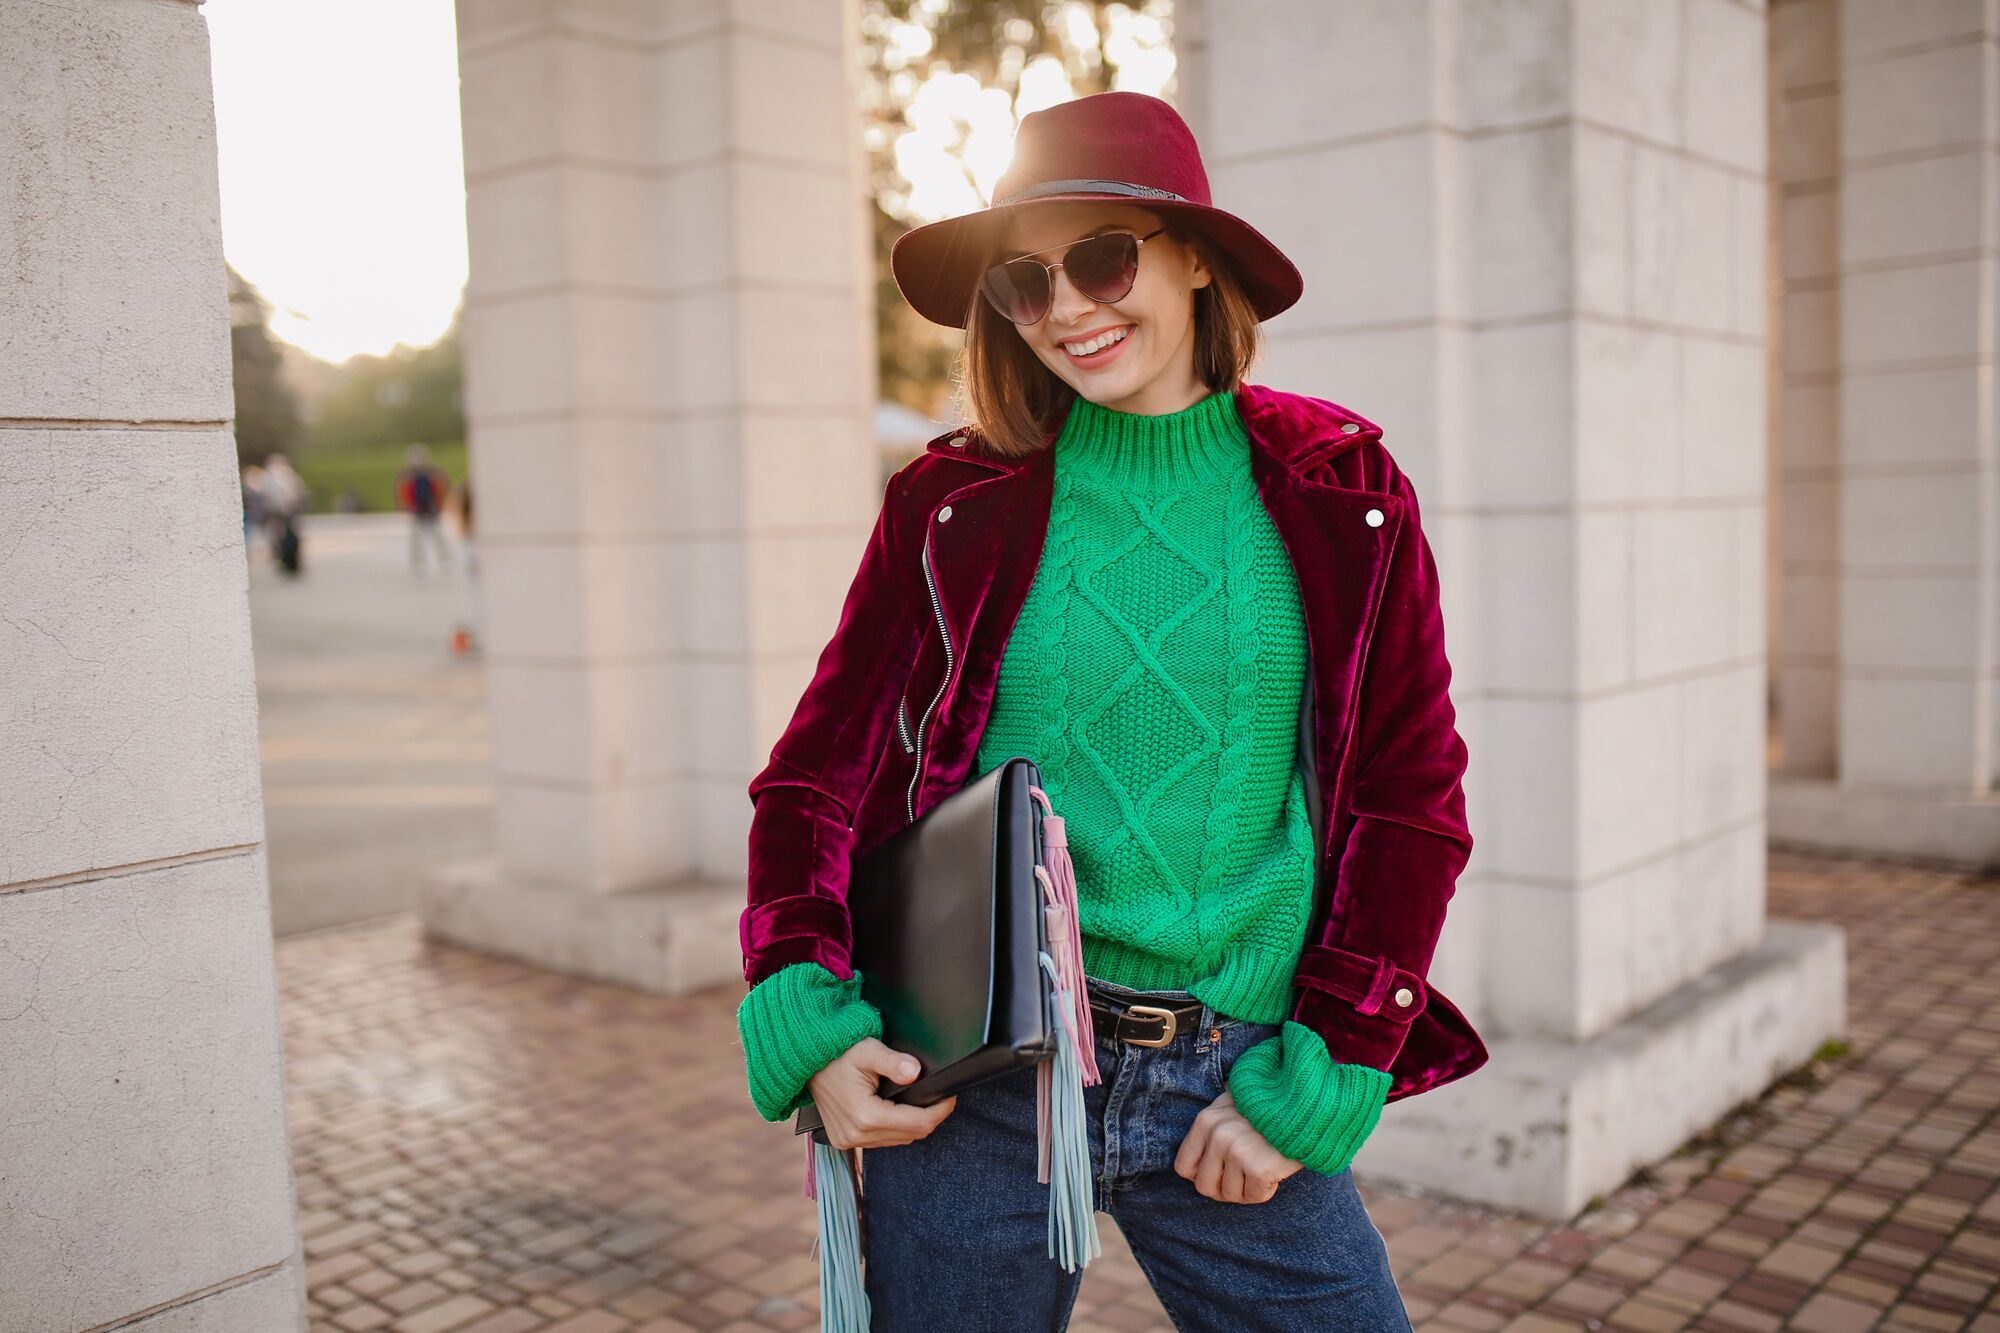 Look cheap: three color combinations that hopelessly spoil any outfit